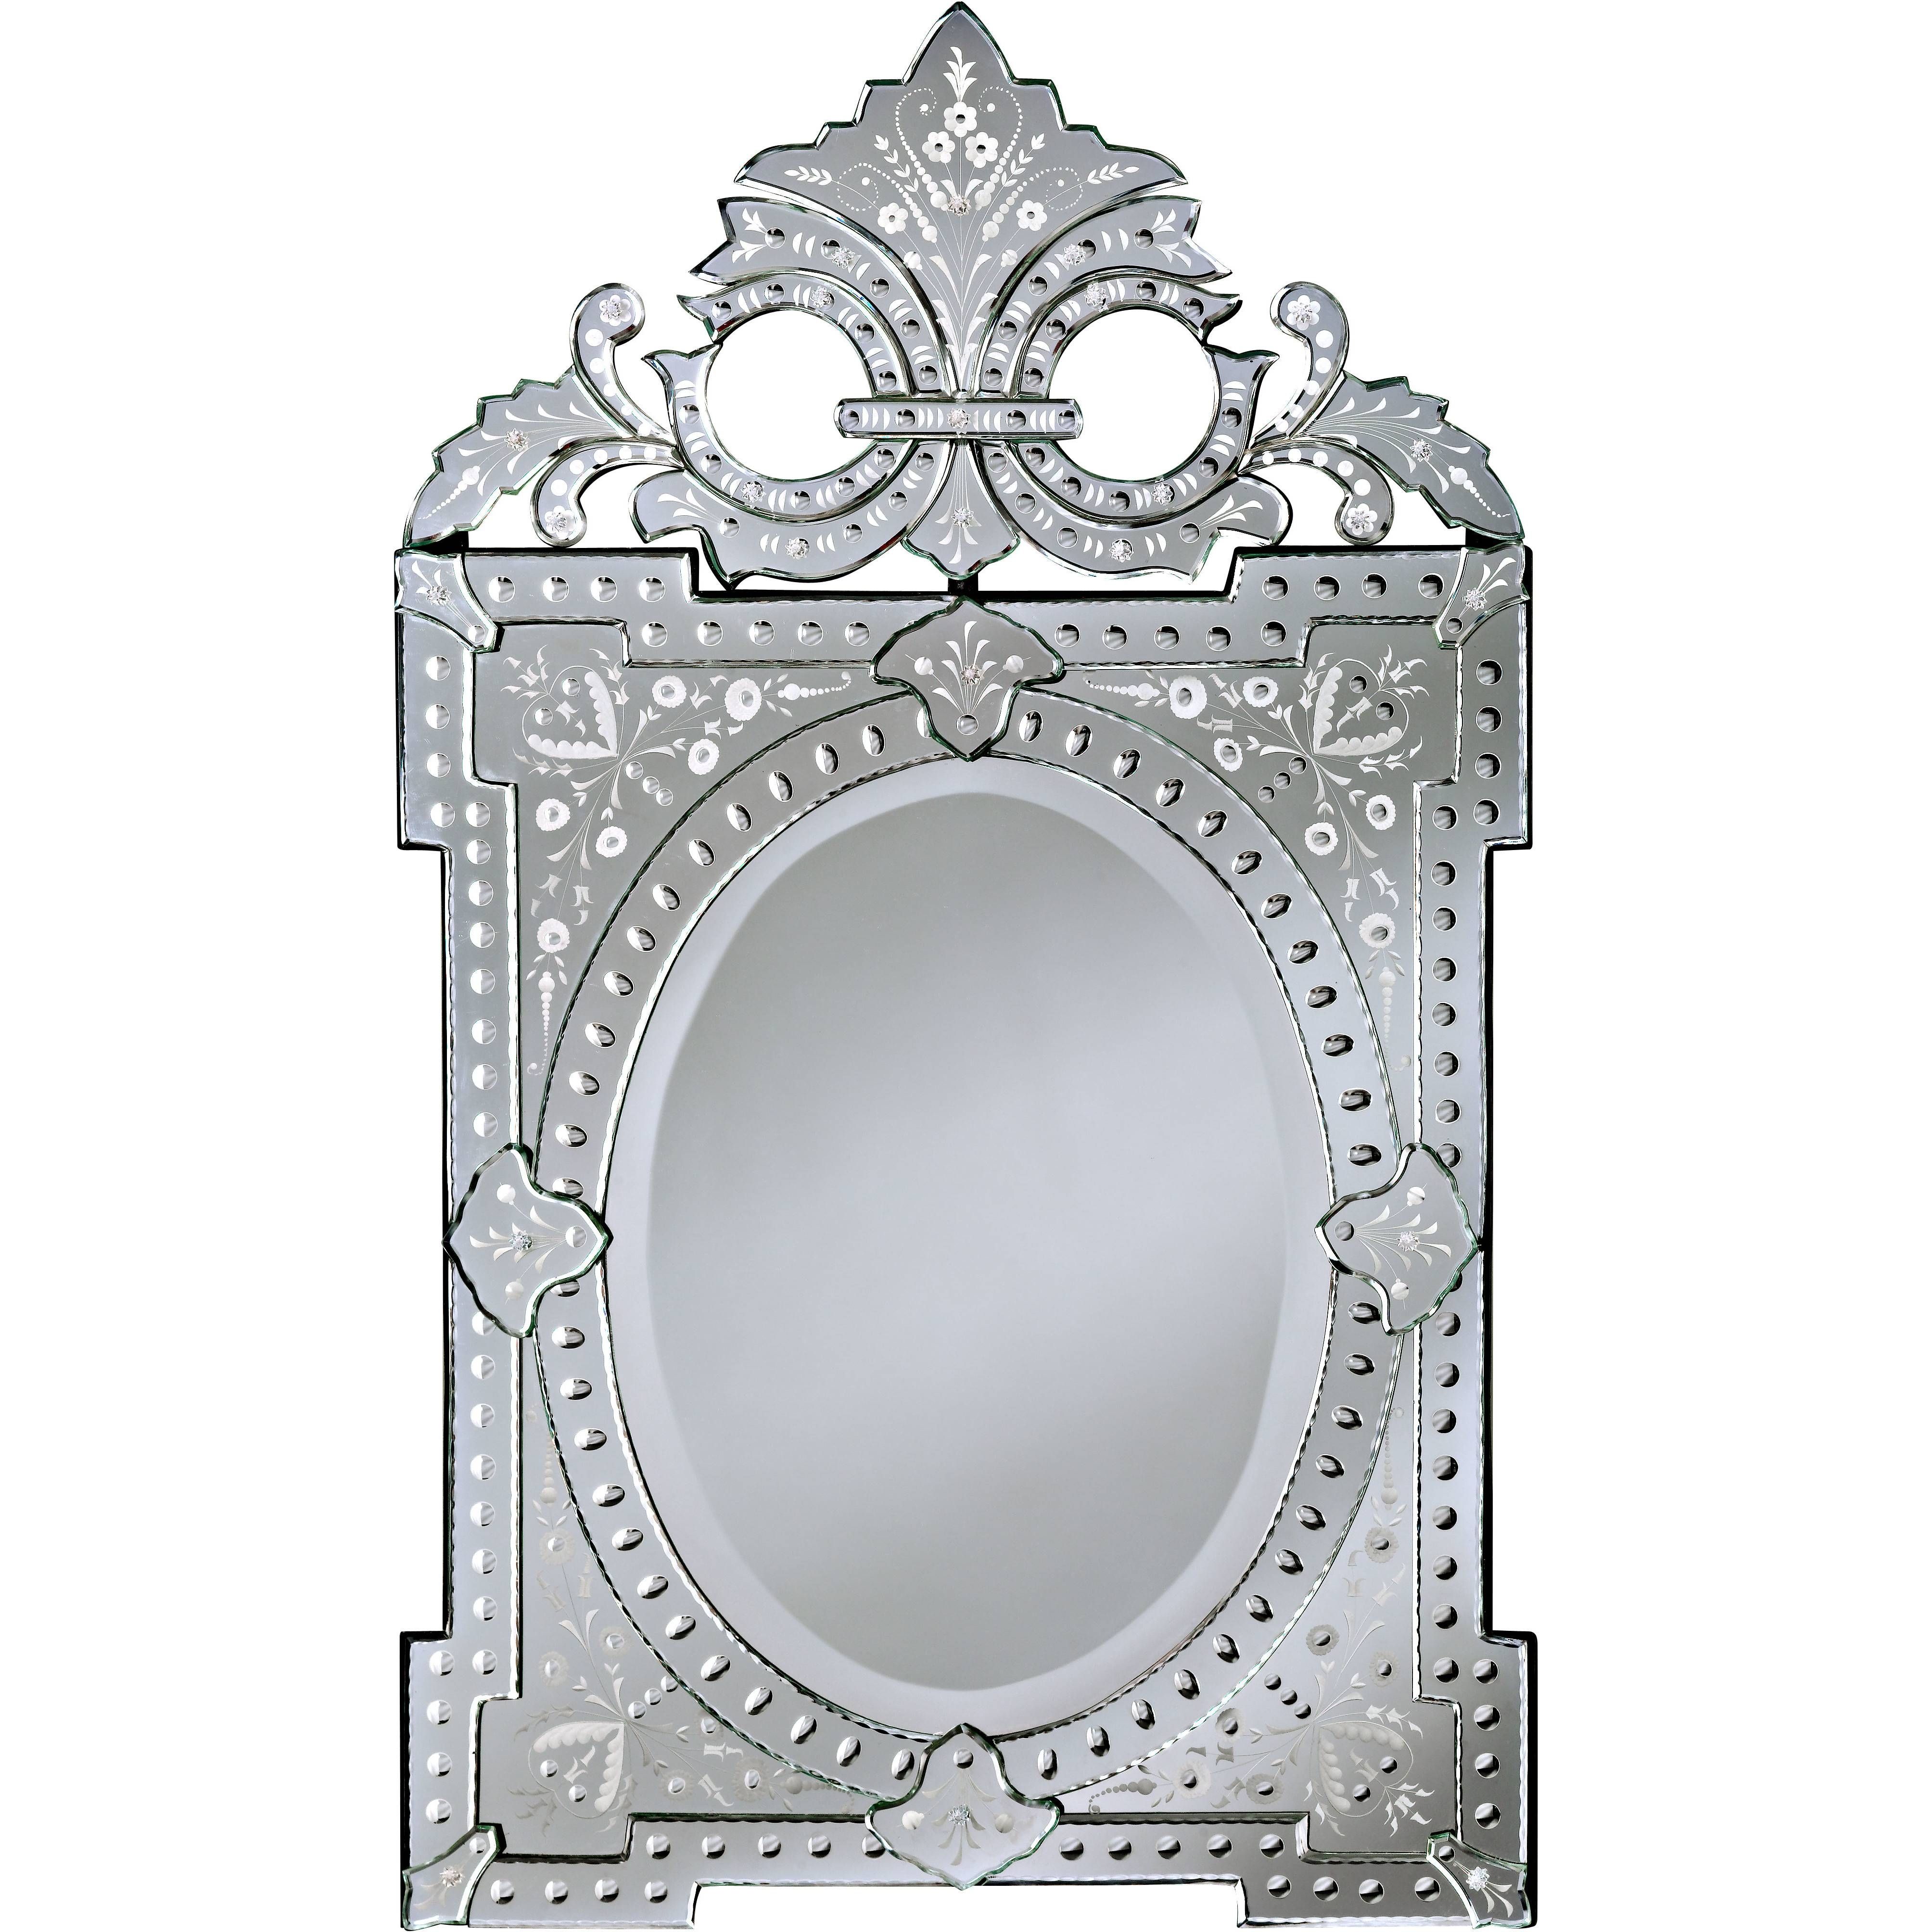 Interior: Antique Venetian Mirrors Oval Venetian Mirror Venetian Pertaining To Black Venetian Mirrors (View 12 of 15)